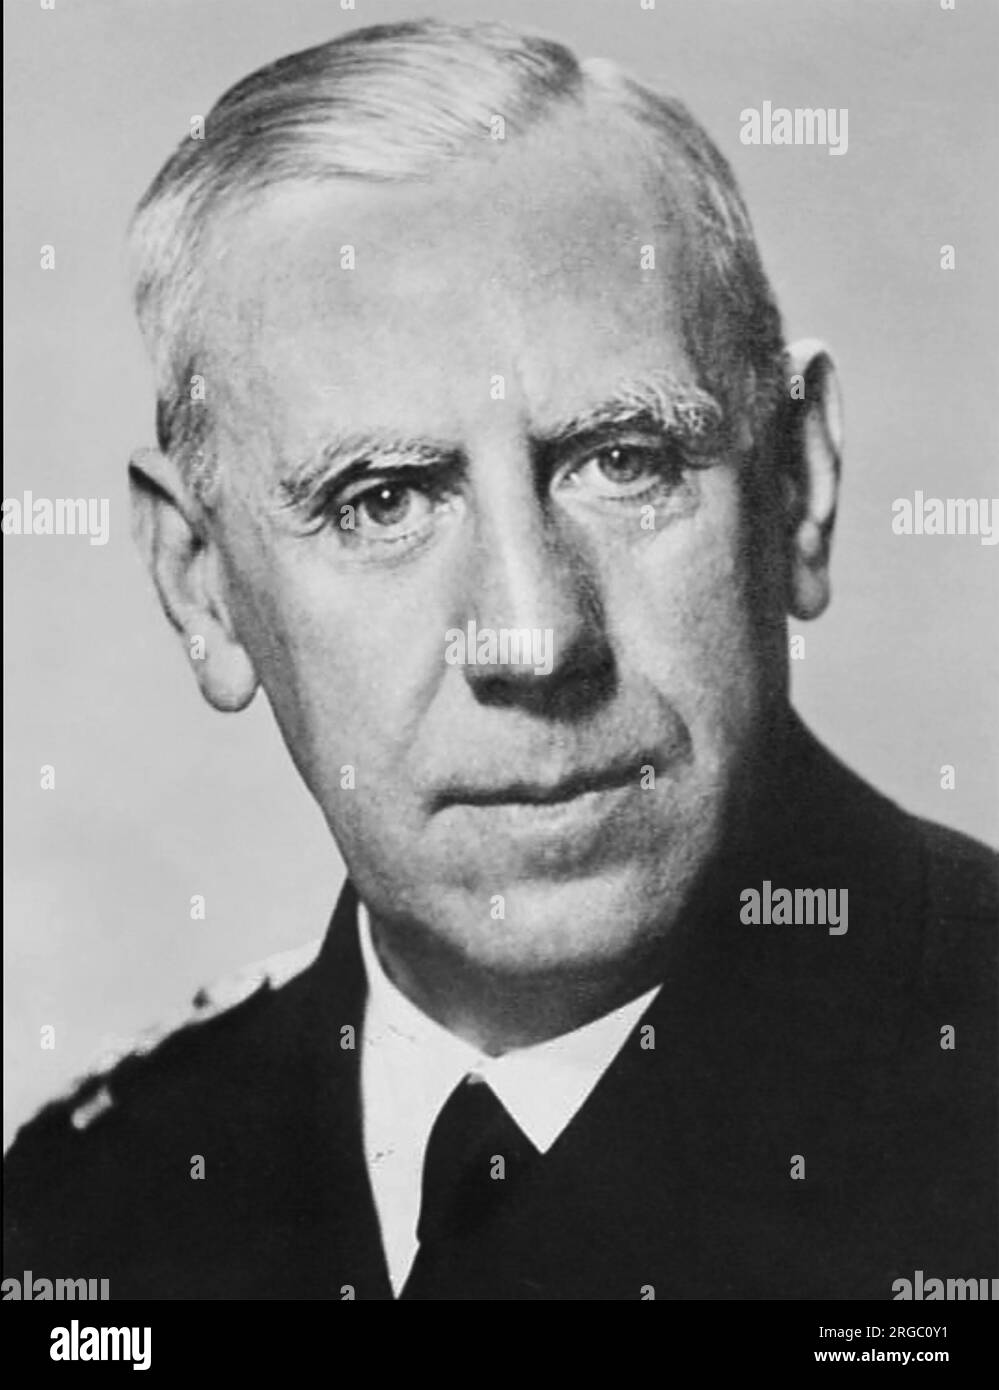 WILHELM CANARIS (1887-1945)  German admiral and Abwehr chief, about 1940. Stock Photo